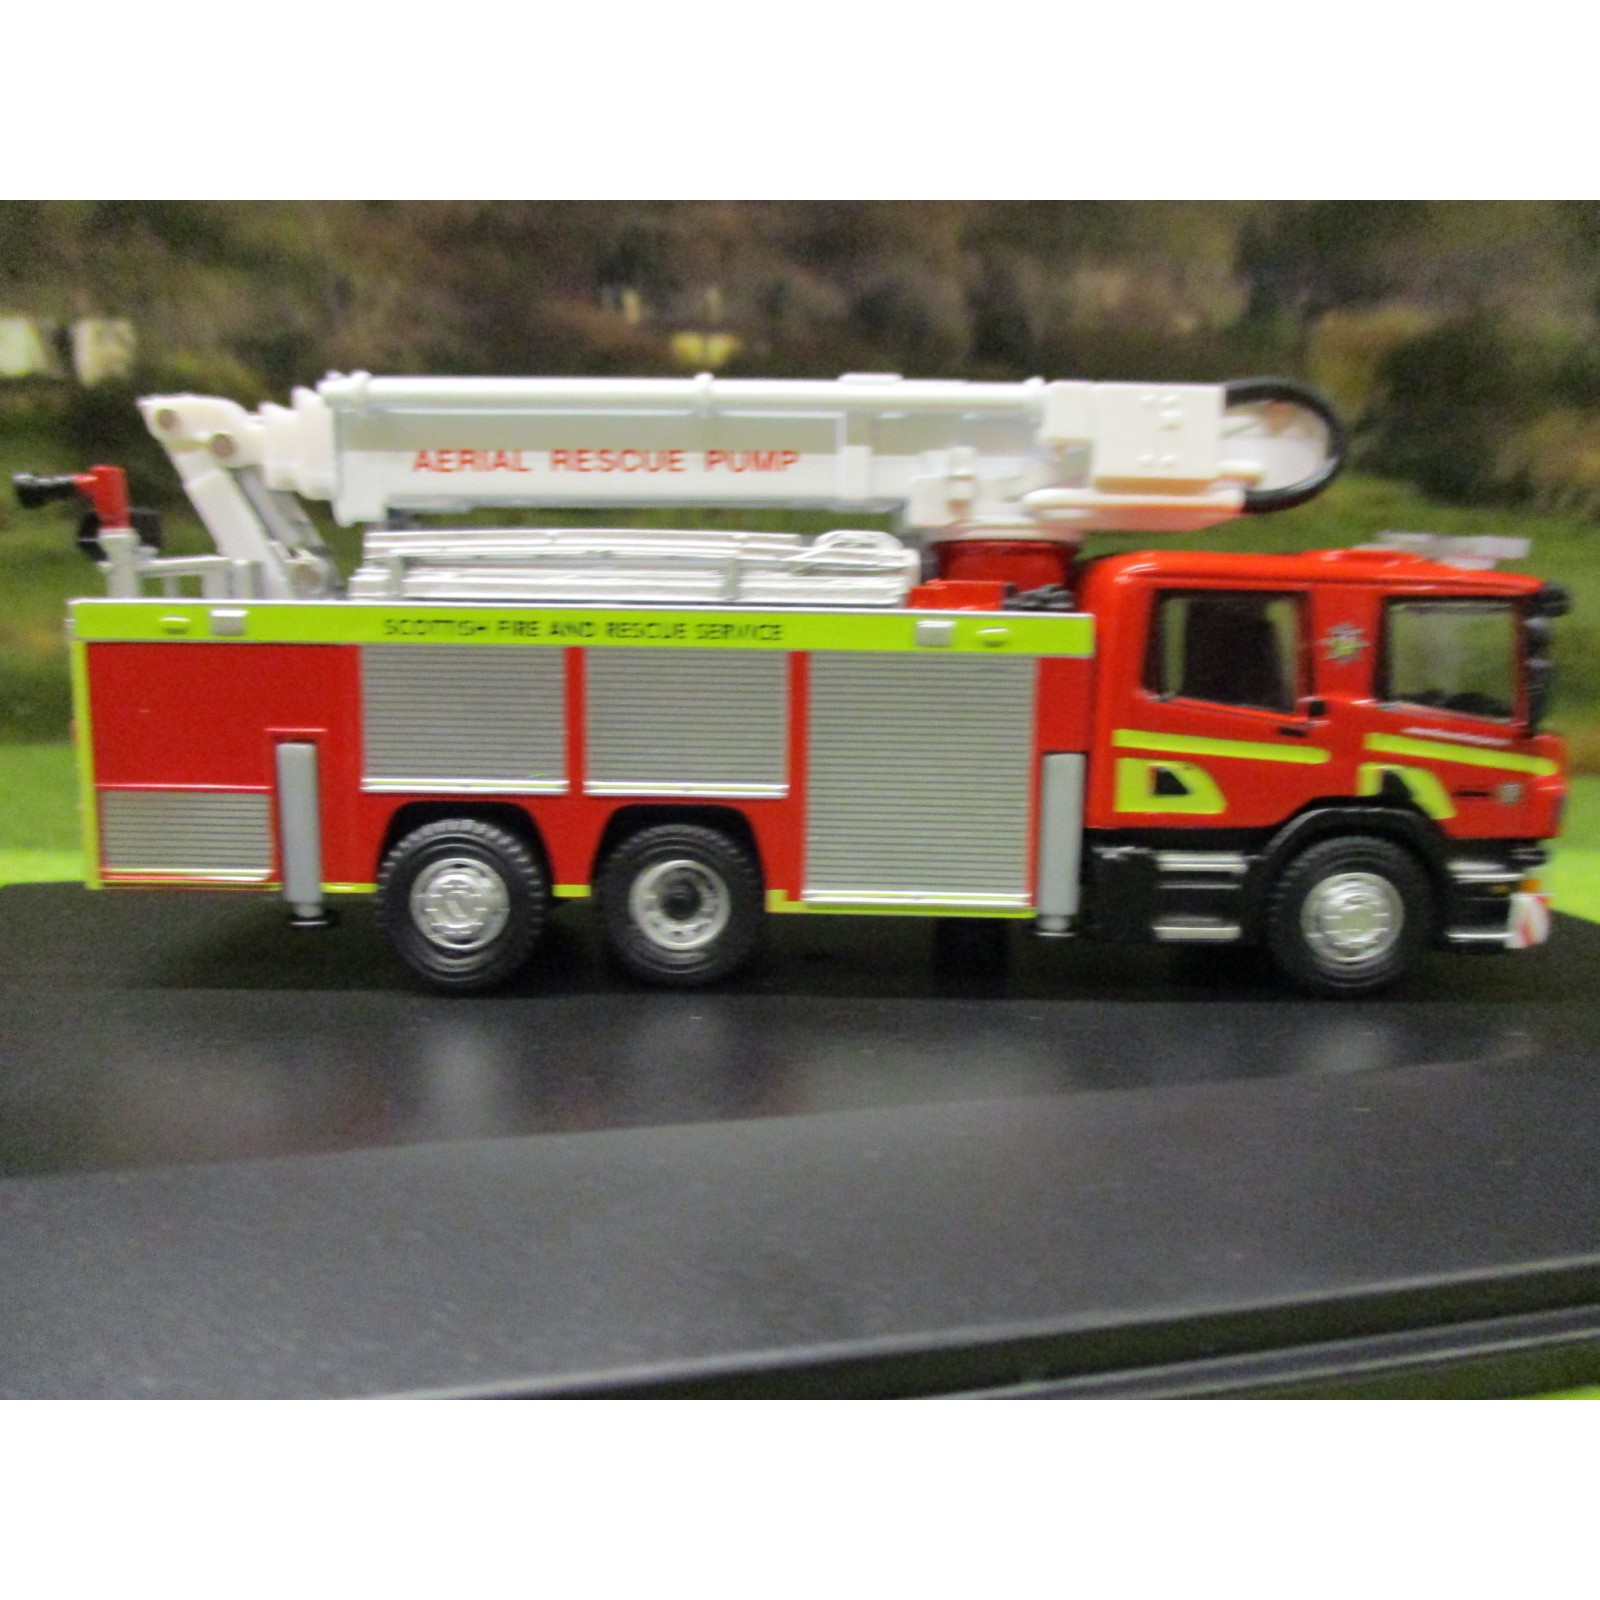 1:76 OXFORD SCANIA FIRE AERIAL RESCUE PUMP SCOTTISH FIRE RESCUE - One32 Farm toys and